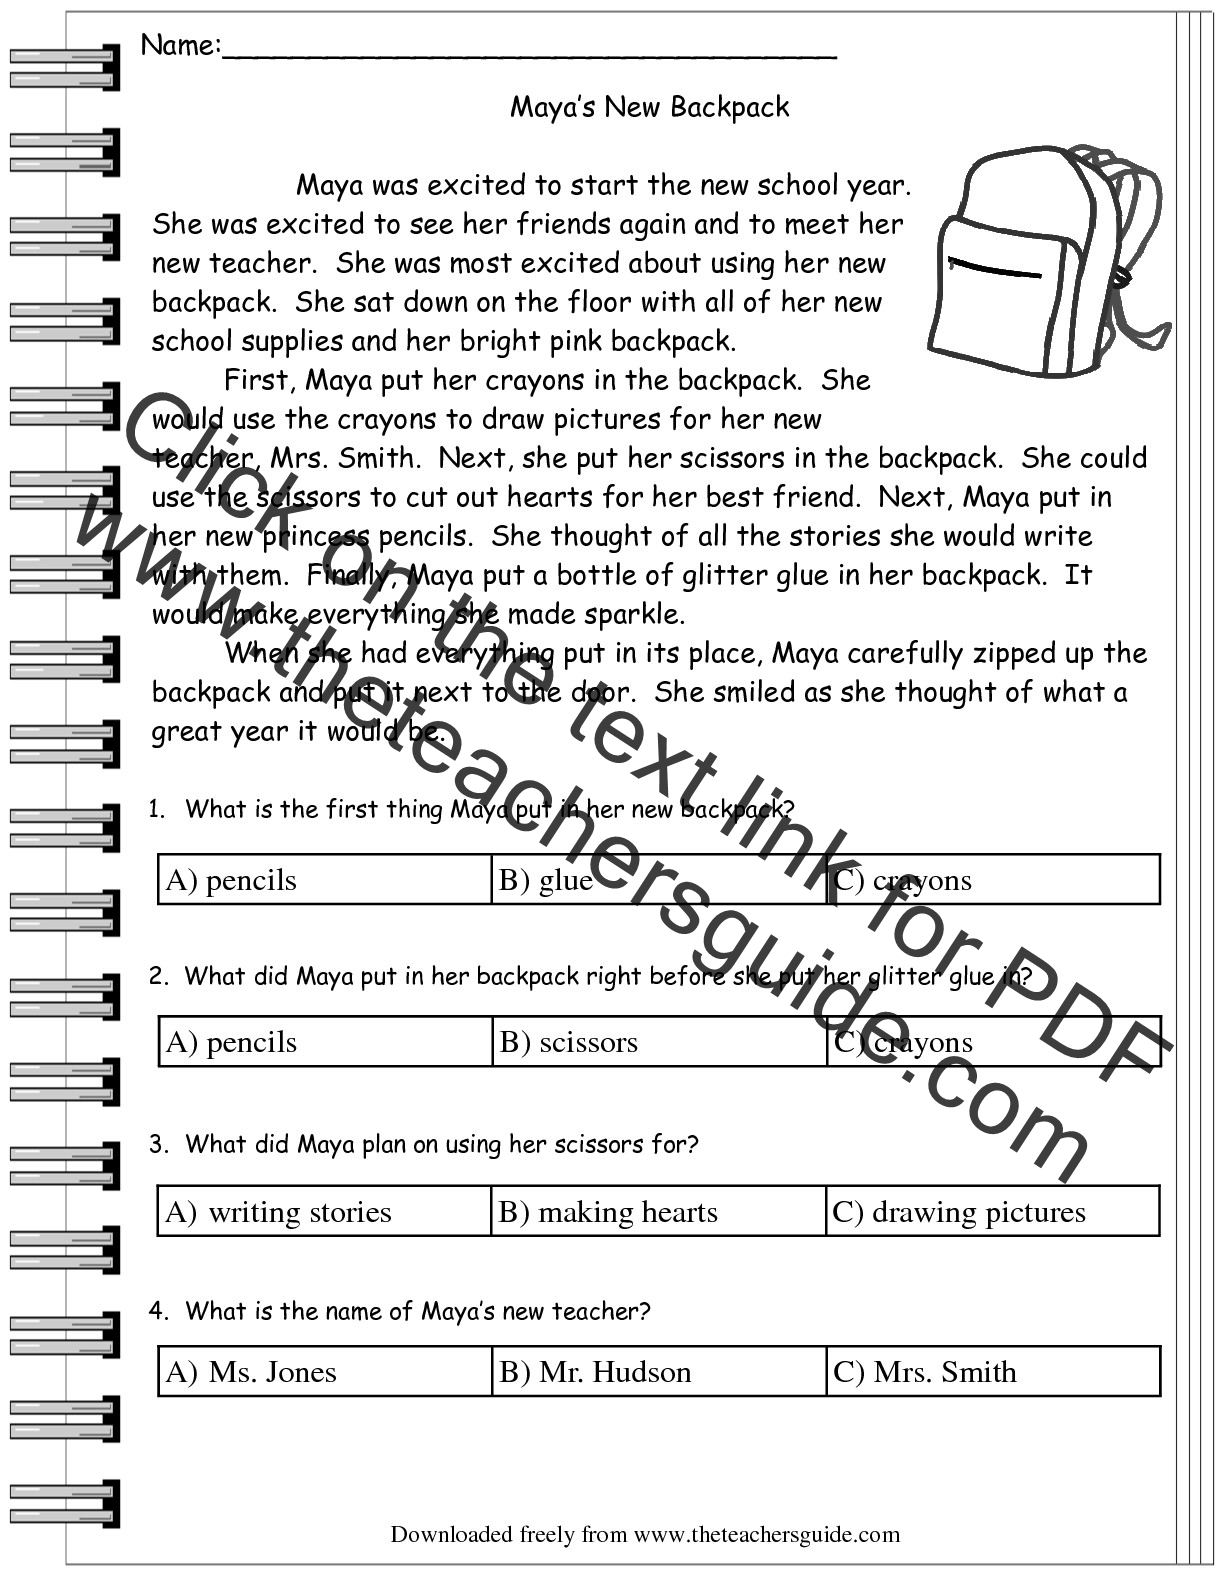 reading-comprehension-worksheets-5th-grade-multiple-choice-free-printable